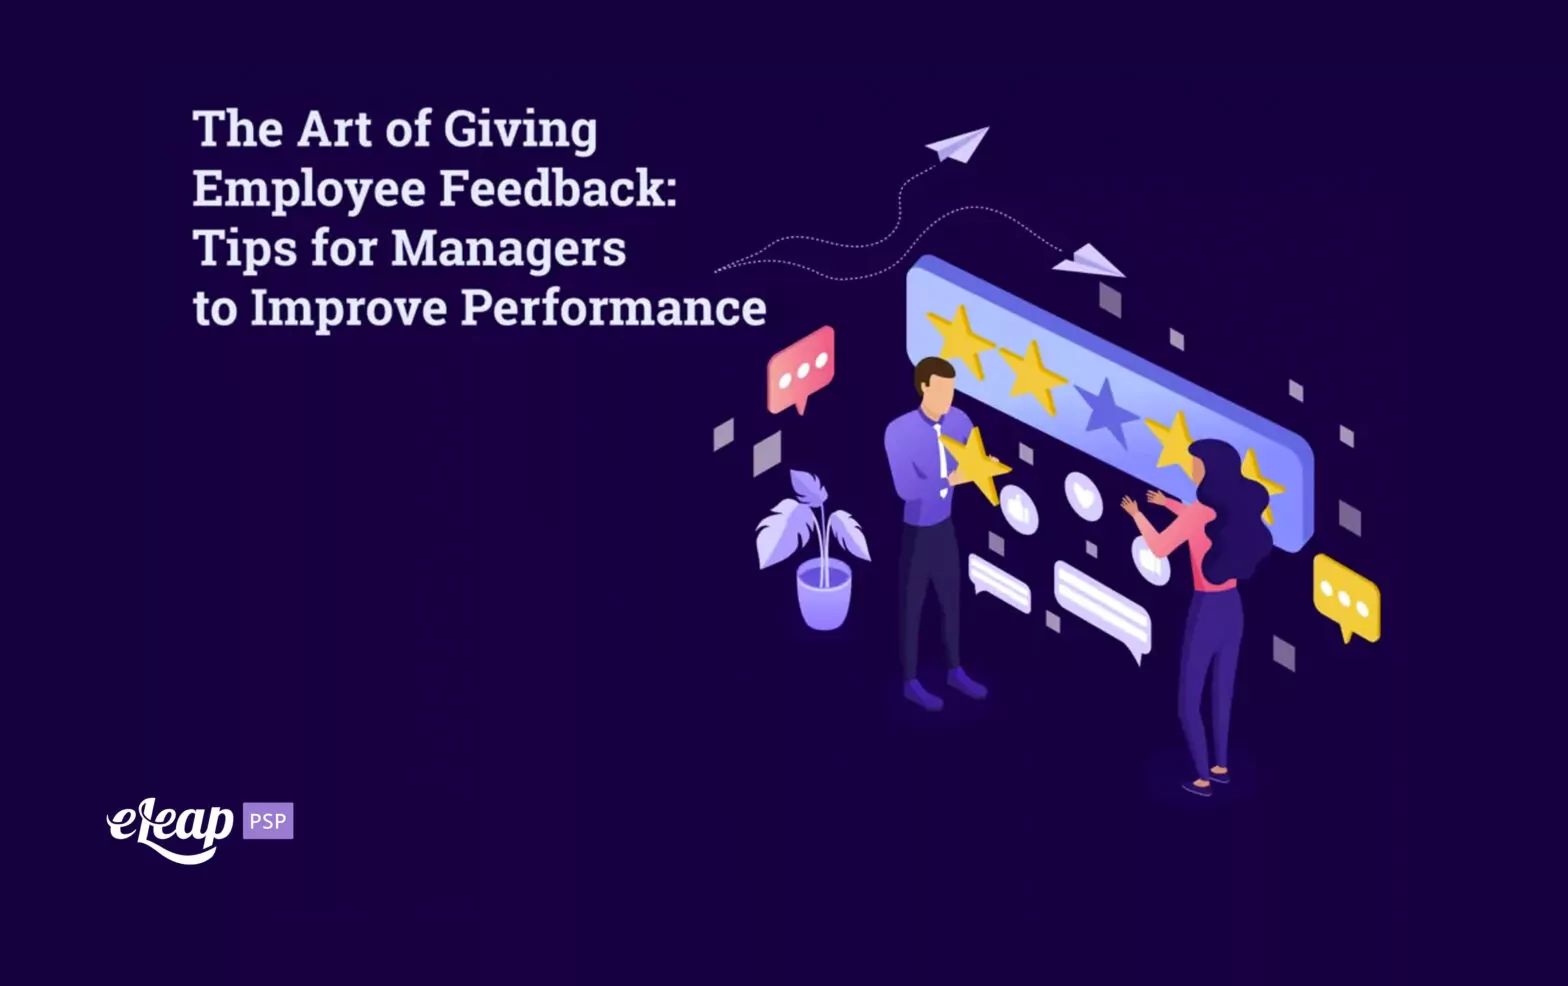 The Art of Giving Employee Feedback: Tips for Managers to Improve Performance